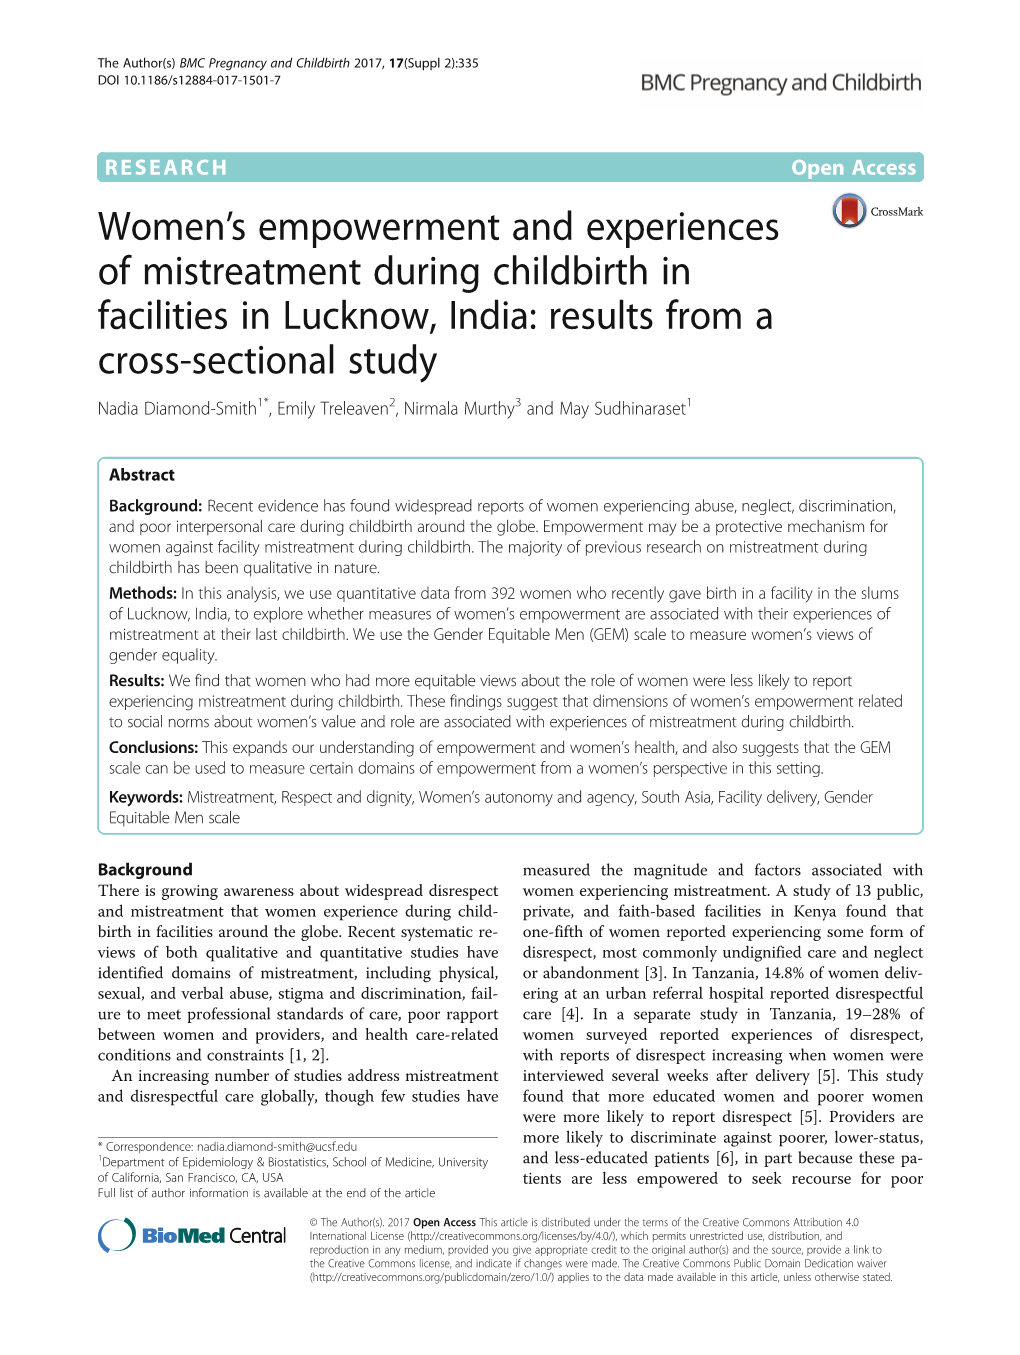 Women's Empowerment and Experiences of Mistreatment During